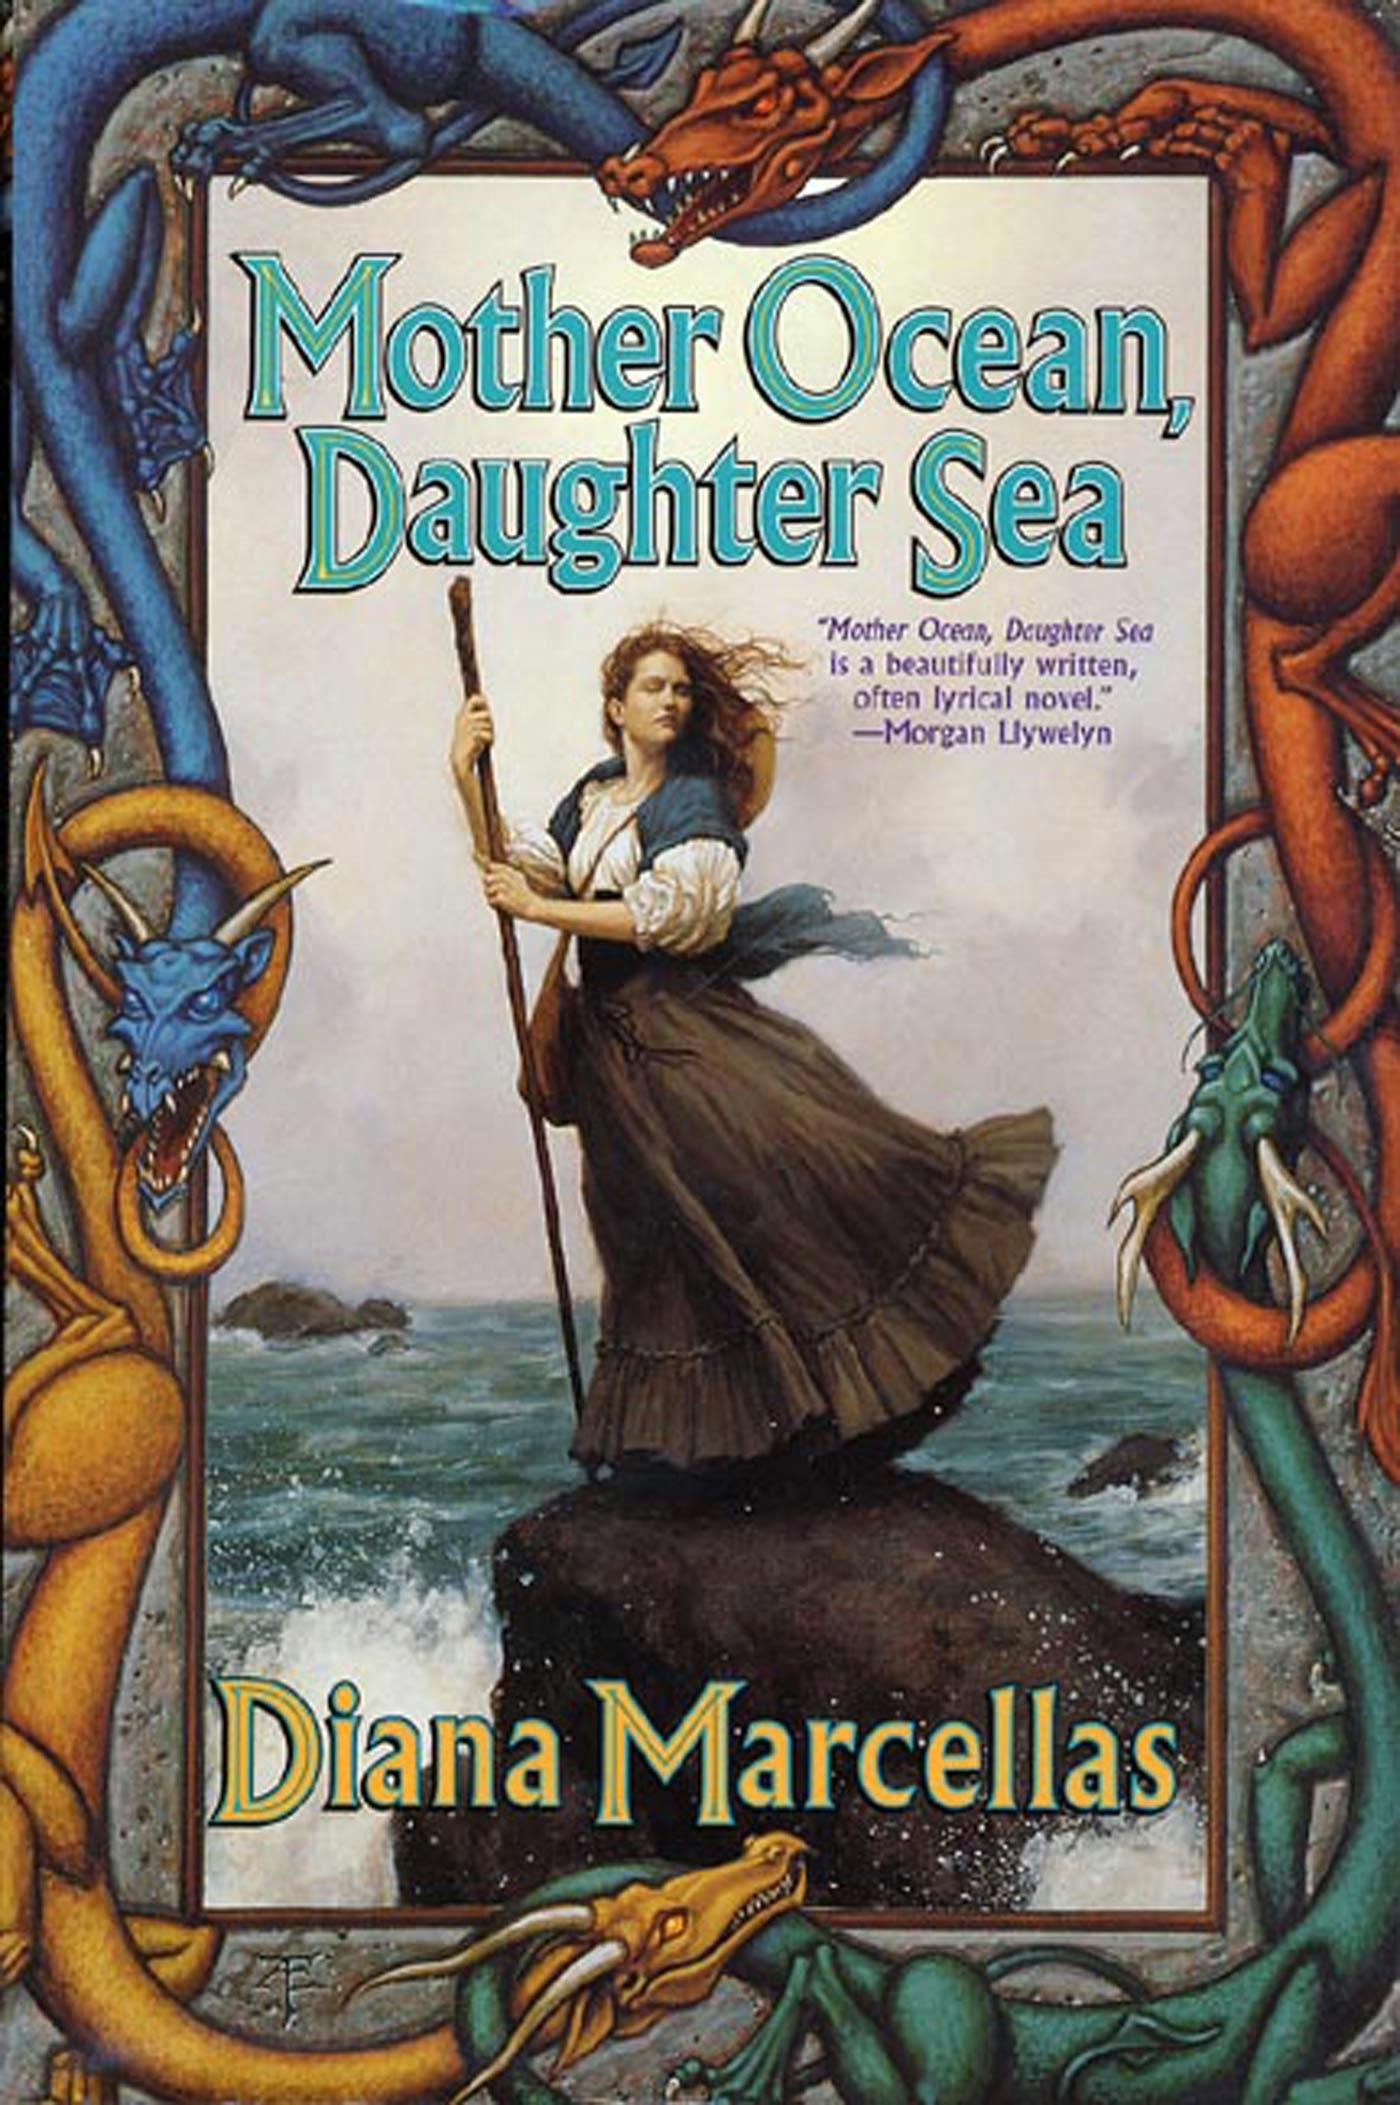 Cover for the book titled as: Mother Ocean, Daughter Sea